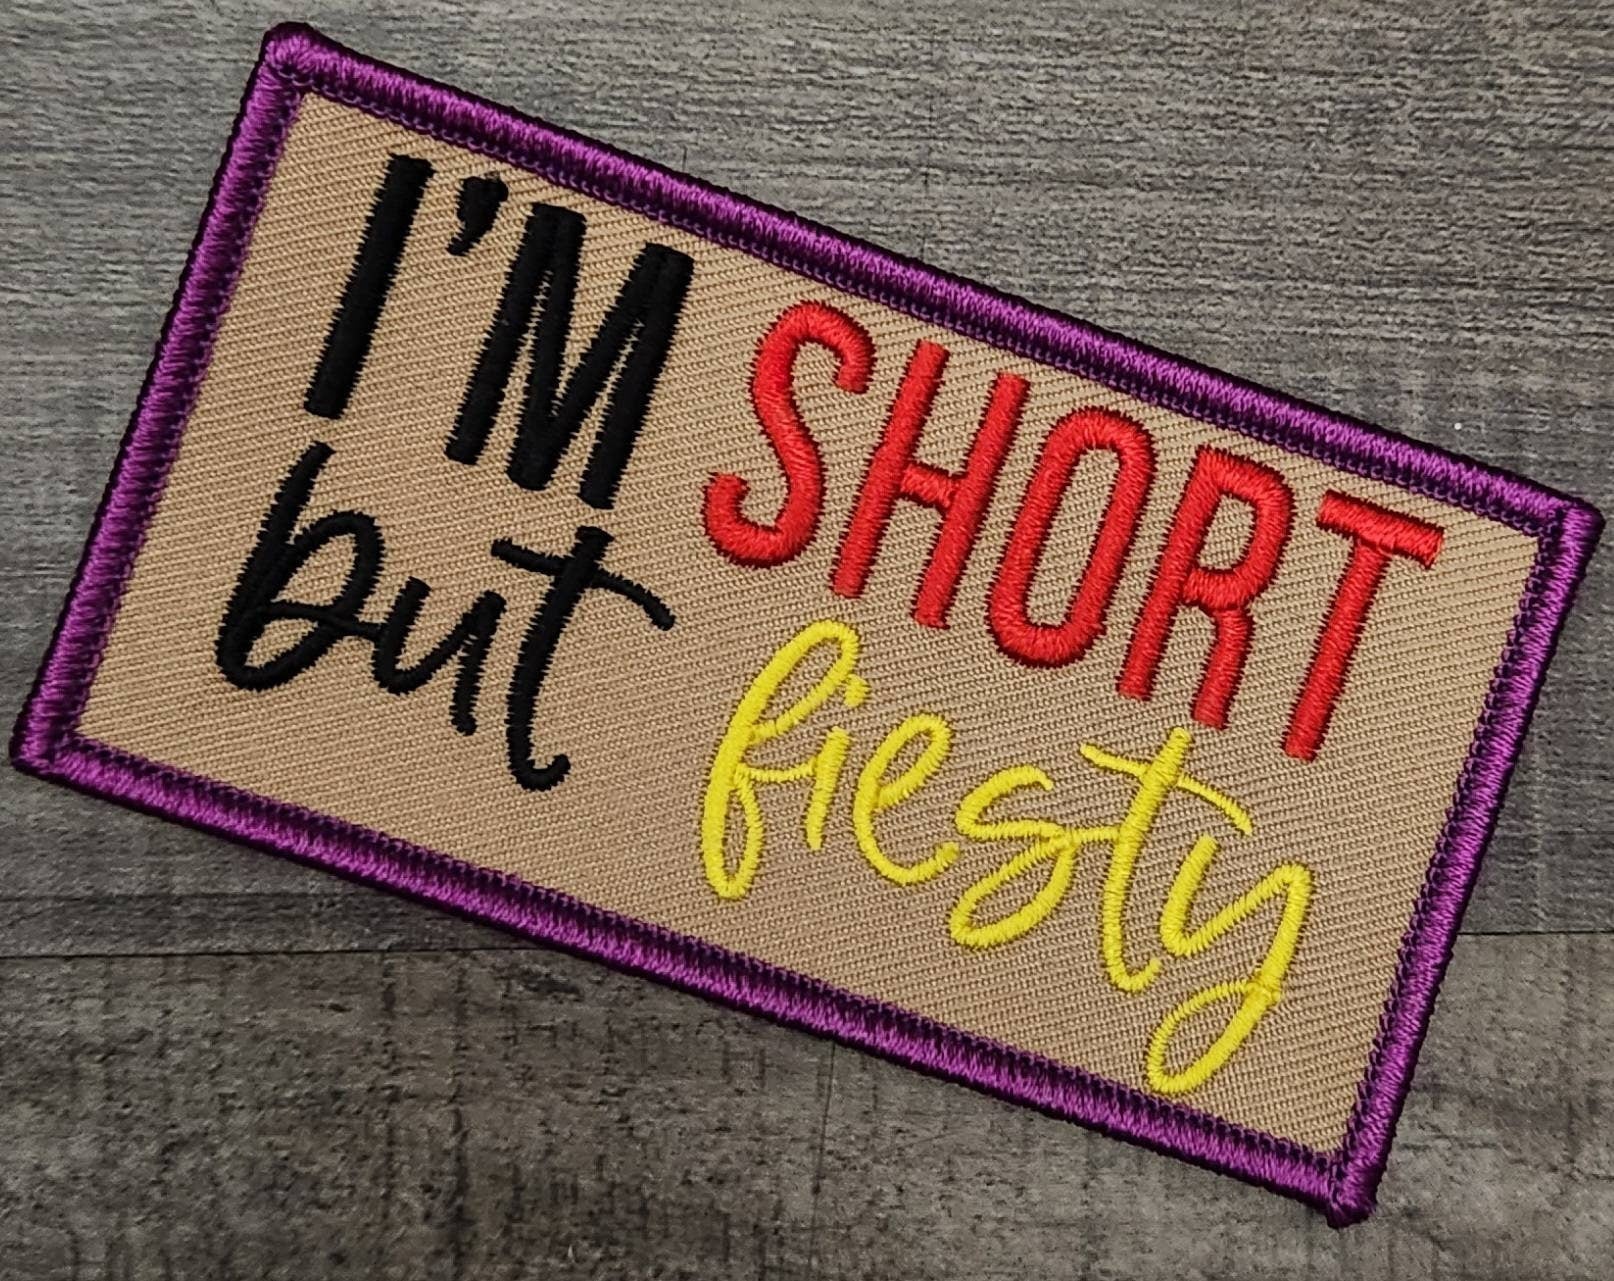 Funny Patch, 1-pc Short But Feisty Statement Patch, Size 3.75x2,  Applique for Clothing, Hats, Shoes, Bags, Iron-On Embroidered Patch